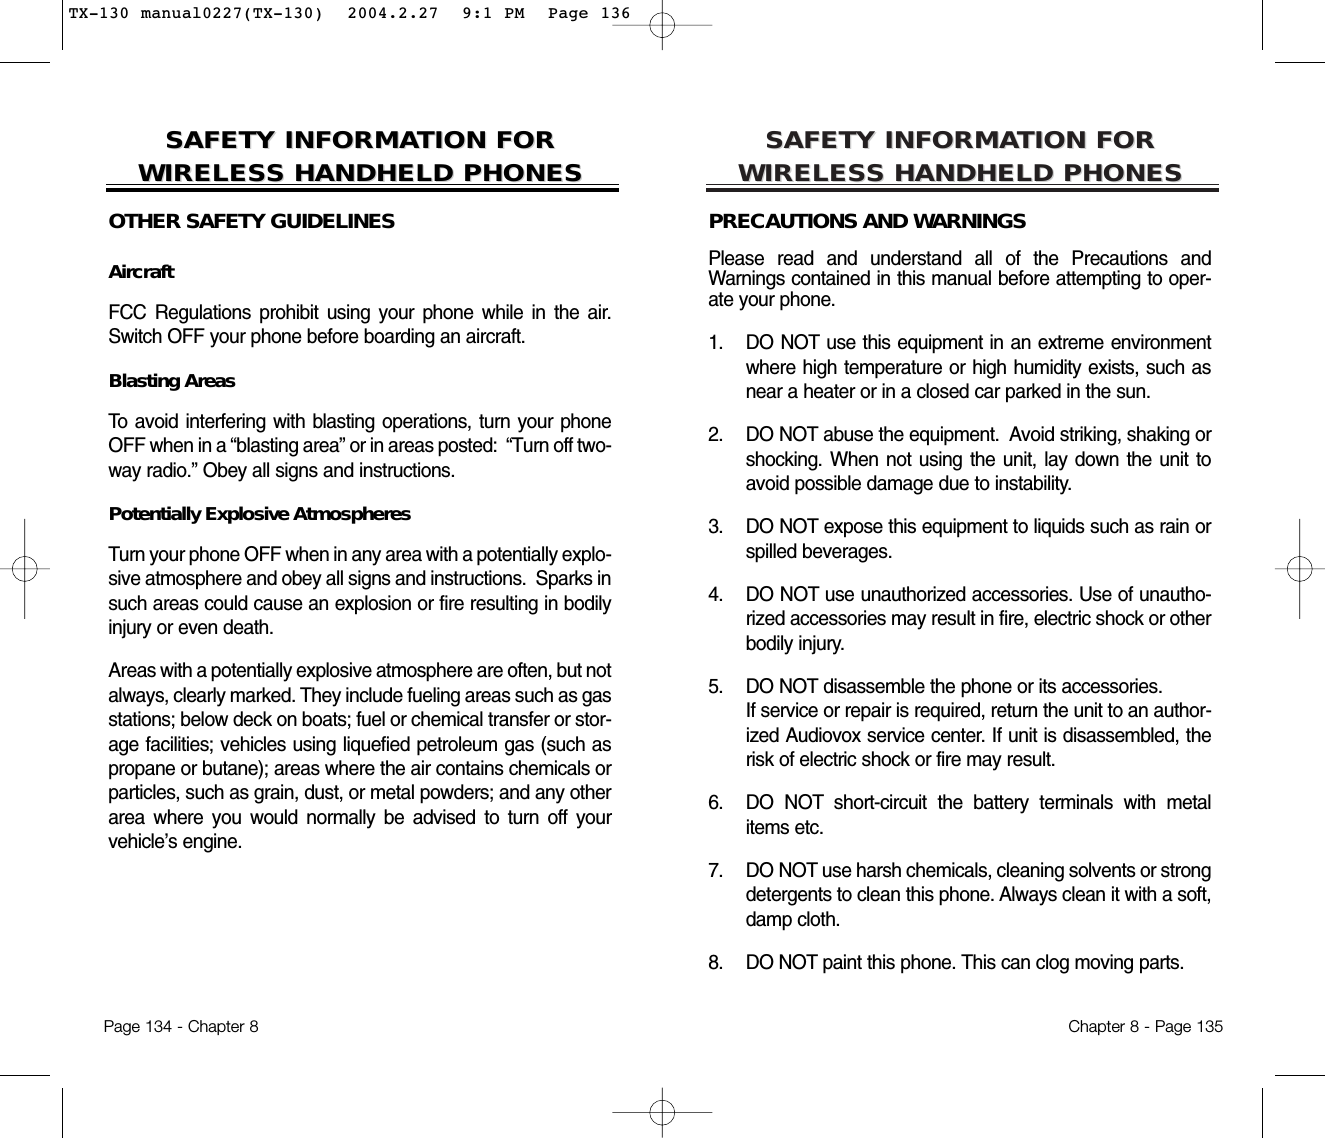 SAFETY INFORMASAFETY INFORMATION FOR TION FOR WIRELESS HANDHELD PHONESWIRELESS HANDHELD PHONESPRECAUTIONS AND WARNINGSPlease read and understand all of the Precautions andWarnings contained in this manual before attempting to oper-ate your phone.  1. DO NOT use this equipment in an extreme environmentwhere high temperature or high humidity exists, such asnear a heater or in a closed car parked in the sun.2. DO NOT abuse the equipment.  Avoid striking, shaking orshocking. When not using the unit, lay down the unit toavoid possible damage due to instability.3. DO NOT expose this equipment to liquids such as rain orspilled beverages.4. DO NOT use unauthorized accessories. Use of unautho-rized accessories may result in fire, electric shock or otherbodily injury.  5. DO NOT disassemble the phone or its accessories.  If service or repair is required, return the unit to an author-ized Audiovox service center. If unit is disassembled, therisk of electric shock or fire may result.6. DO NOT short-circuit the battery terminals with metalitems etc.7.  DO NOT use harsh chemicals, cleaning solvents or strongdetergents to clean this phone. Always clean it with a soft,damp cloth.8.  DO NOT paint this phone. This can clog moving parts. Chapter 8 - Page 135SAFETY INFORMASAFETY INFORMATION FOR TION FOR WIRELESS HANDHELD PHONESWIRELESS HANDHELD PHONESOTHER SAFETY GUIDELINESAircraftFCC Regulations prohibit using your phone while in the air.Switch OFF your phone before boarding an aircraft.Blasting AreasTo avoid interfering with blasting operations, turn your phoneOFF when in a “blasting area” or in areas posted:  “Turn off two-way radio.” Obey all signs and instructions.Potentially Explosive AtmospheresTurn your phone OFF when in any area with a potentially explo-sive atmosphere and obey all signs and instructions.  Sparks insuch areas could cause an explosion or fire resulting in bodilyinjury or even death.Areas with a potentially explosive atmosphere are often, but notalways, clearly marked. They include fueling areas such as gasstations; below deck on boats; fuel or chemical transfer or stor-age facilities; vehicles using liquefied petroleum gas (such aspropane or butane); areas where the air contains chemicals orparticles, such as grain, dust, or metal powders; and any otherarea where you would normally be advised to turn off yourvehicle’s engine.Page 134 - Chapter 8TX-130 manual0227(TX-130)  2004.2.27  9:1 PM  Page 136